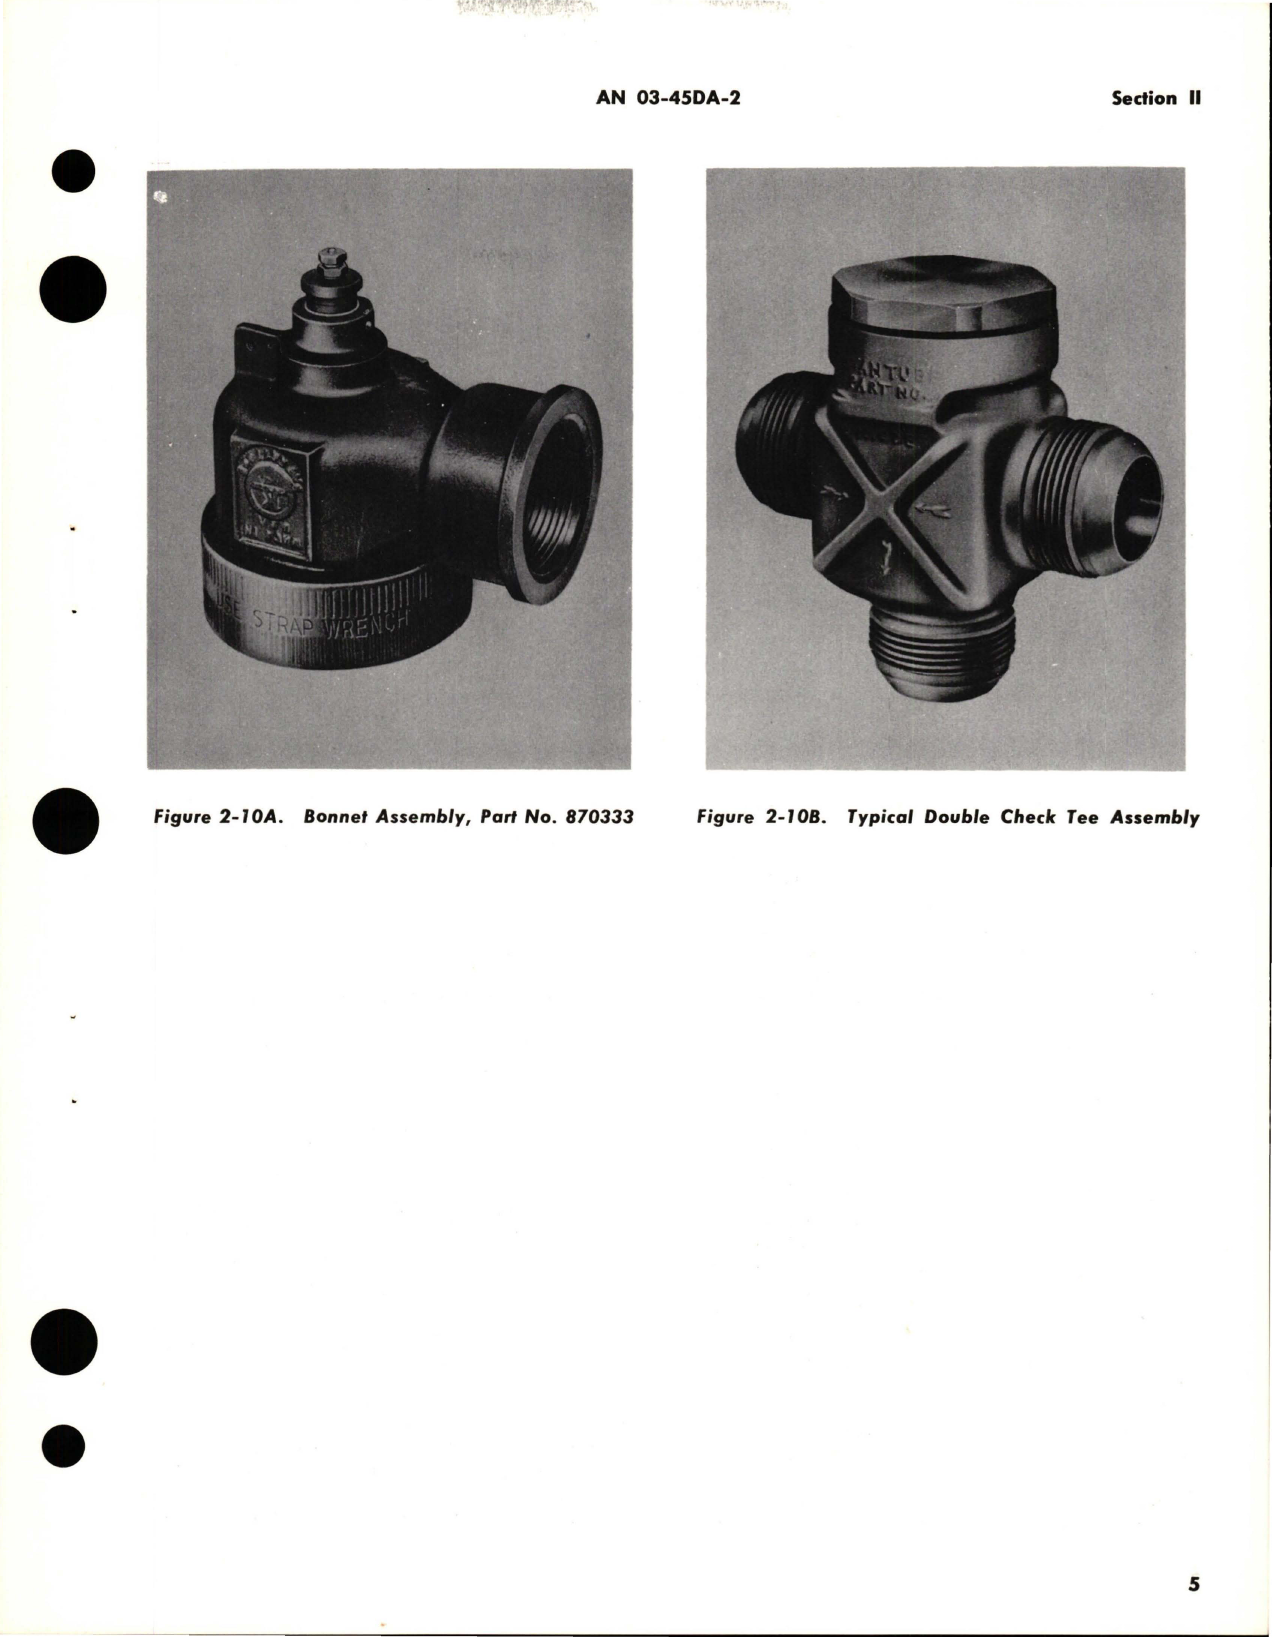 Sample page 9 from AirCorps Library document: Overhaul Instructions for Aircraft-Type Liquid Agent Fire Extinguishing Equipment 